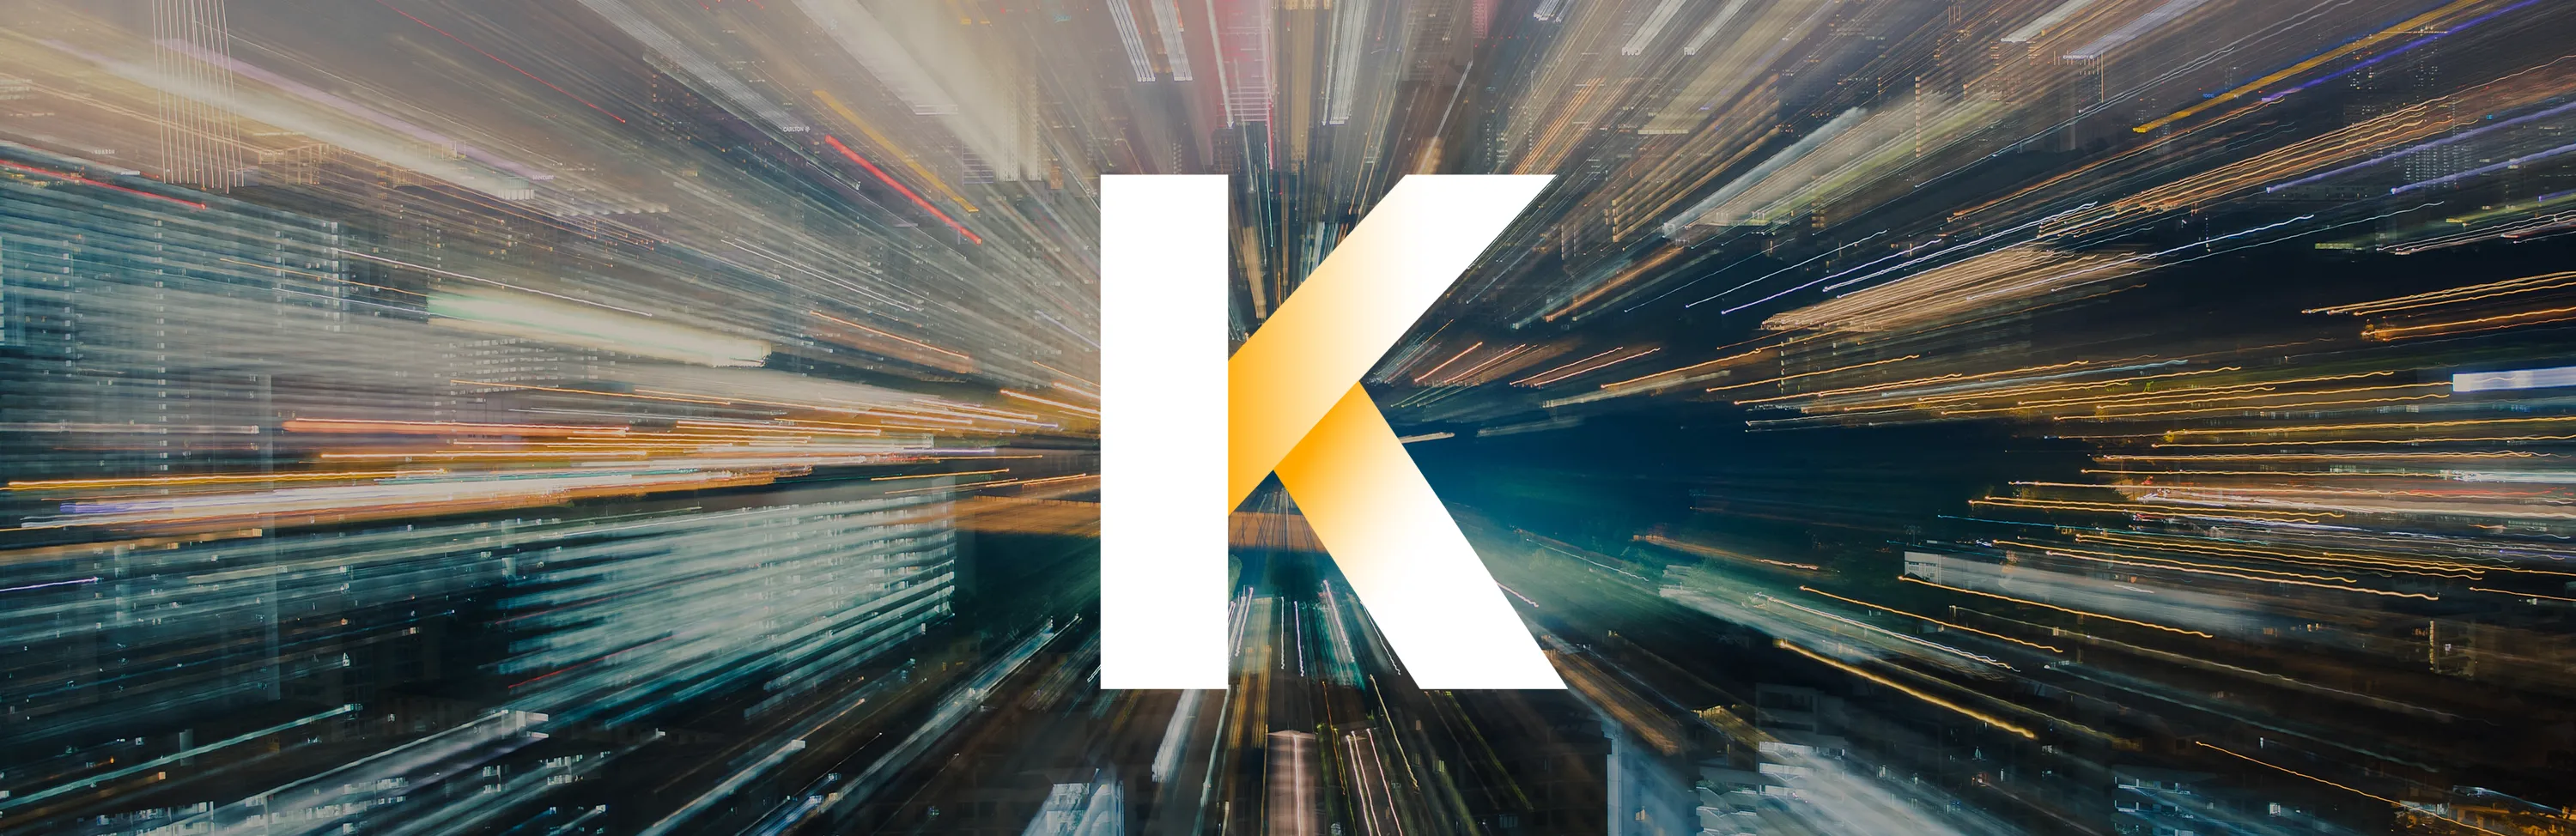 Kadena Completes Hybrid Blockchain Scaling to 480,000 Transactions Per Second on 20 Chains